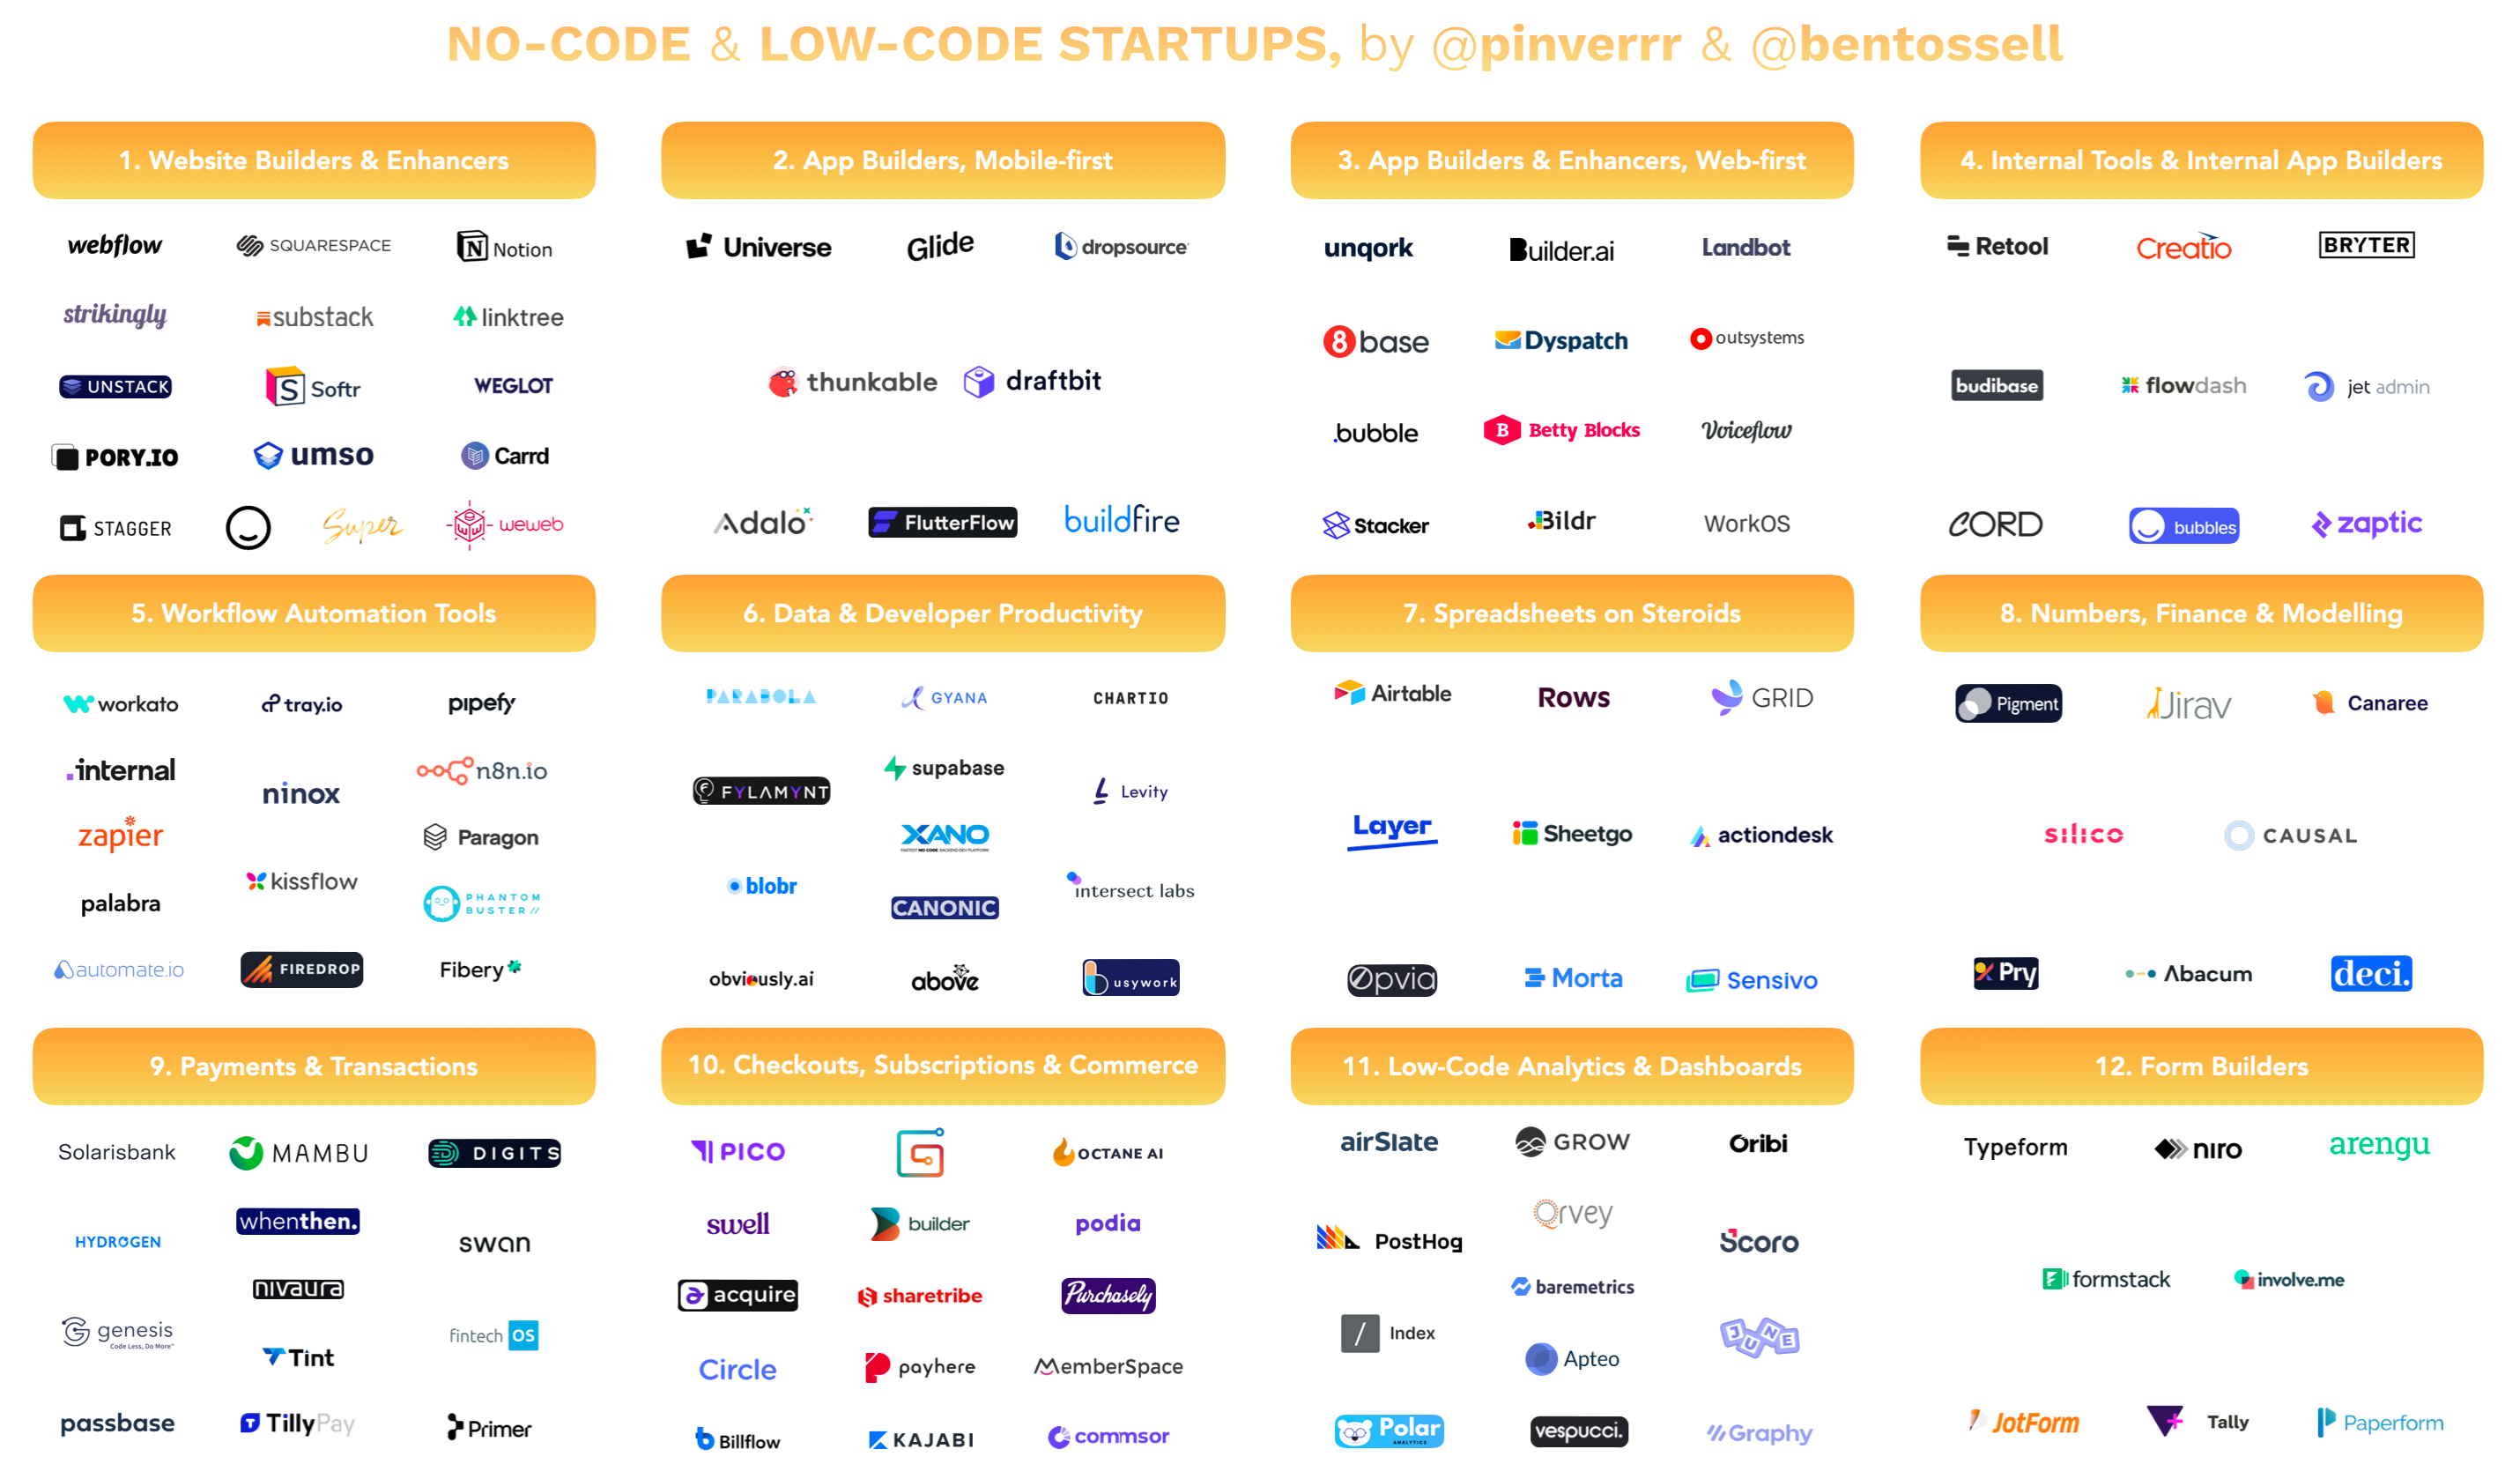 Decoding the no-code / low-code startup universe and its players | by  Pietro Invernizzi | Medium